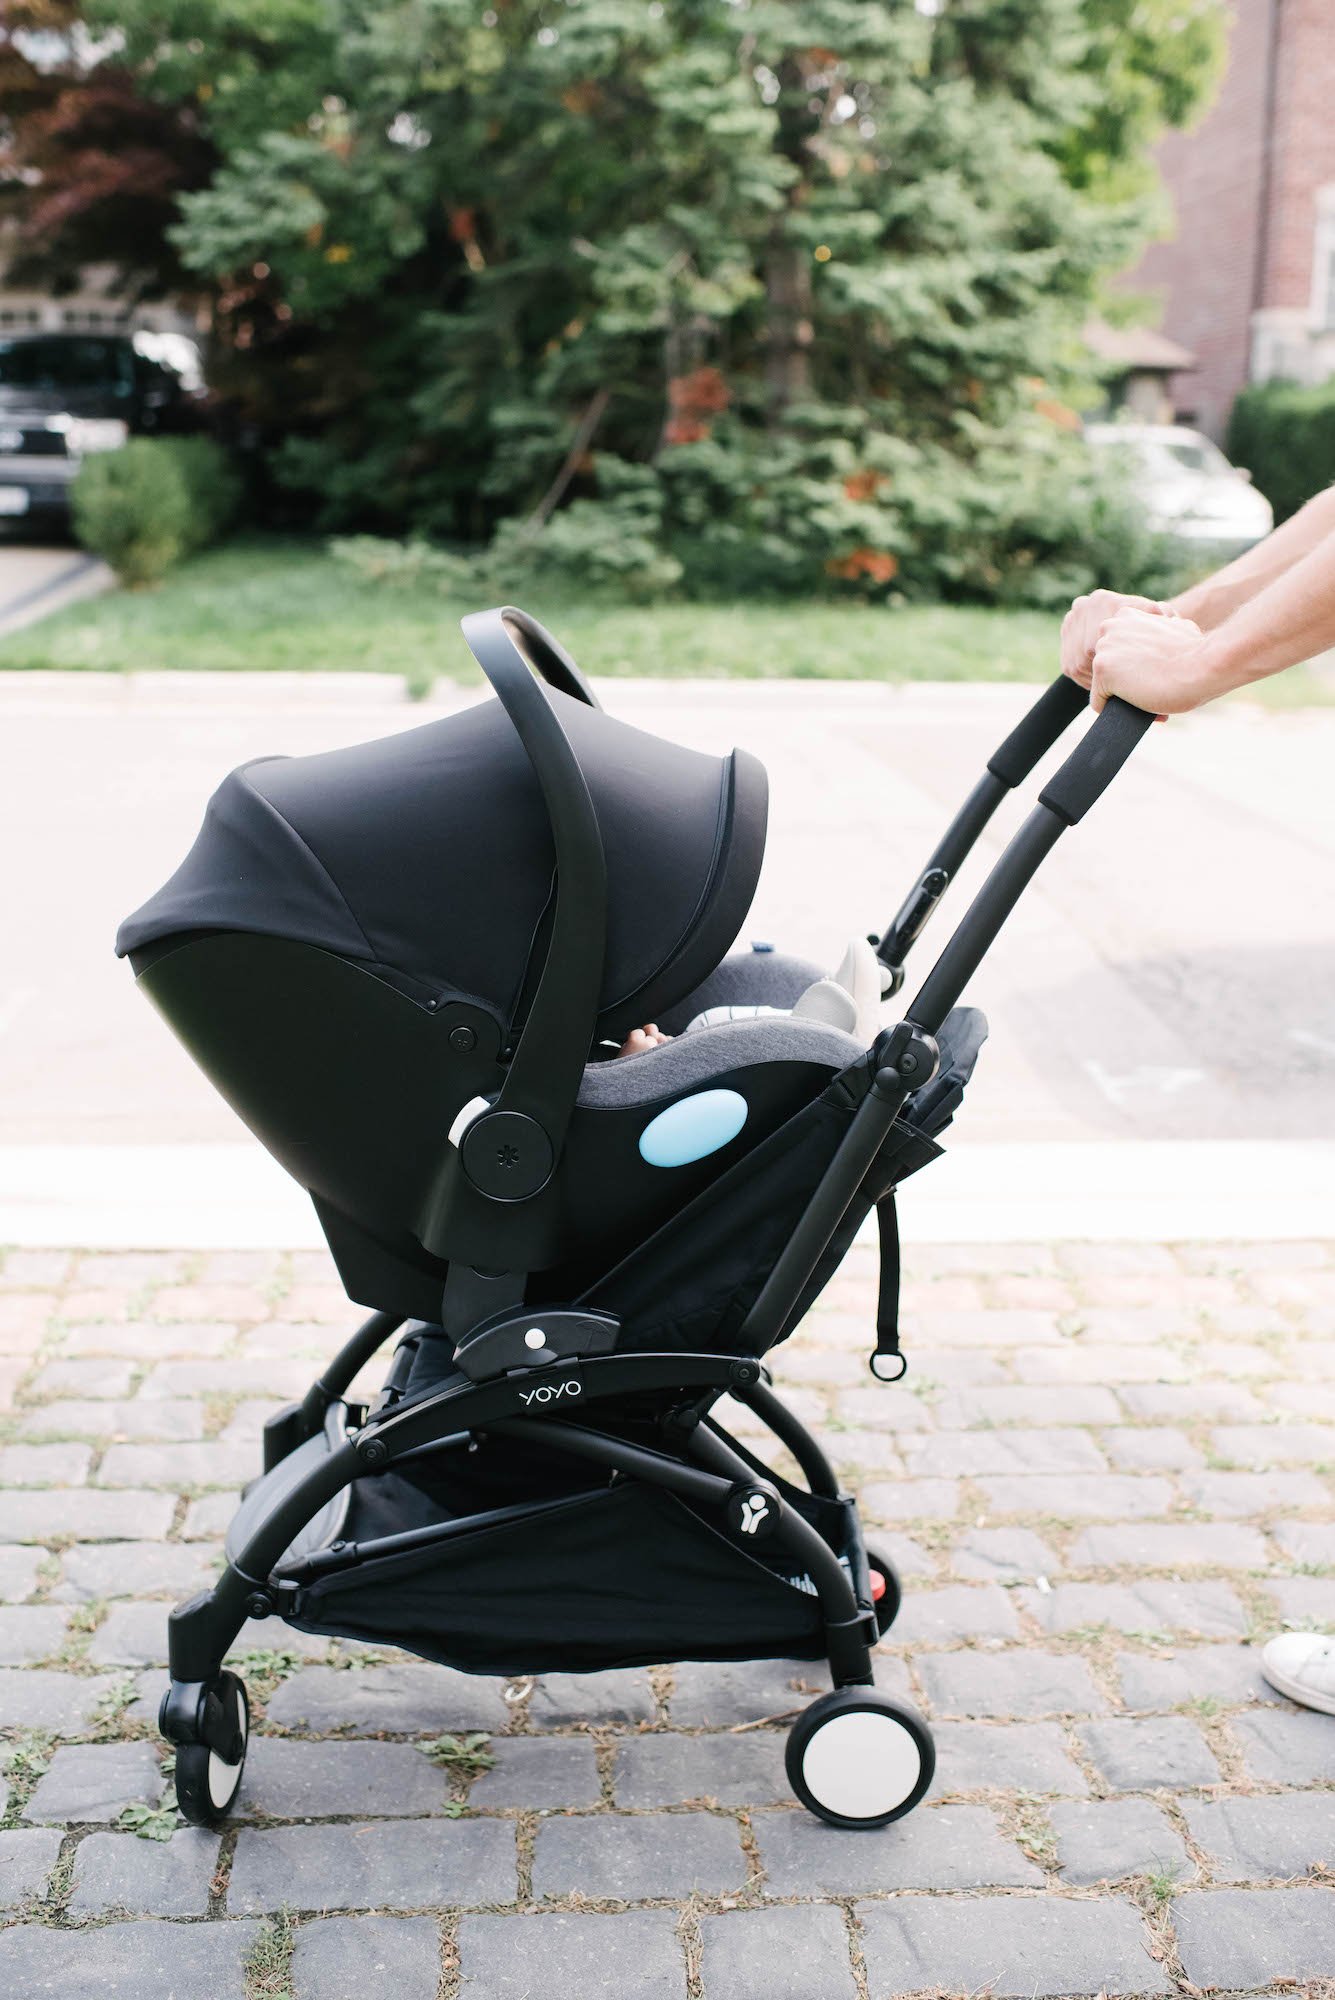 Must-Have Baby Safety Products